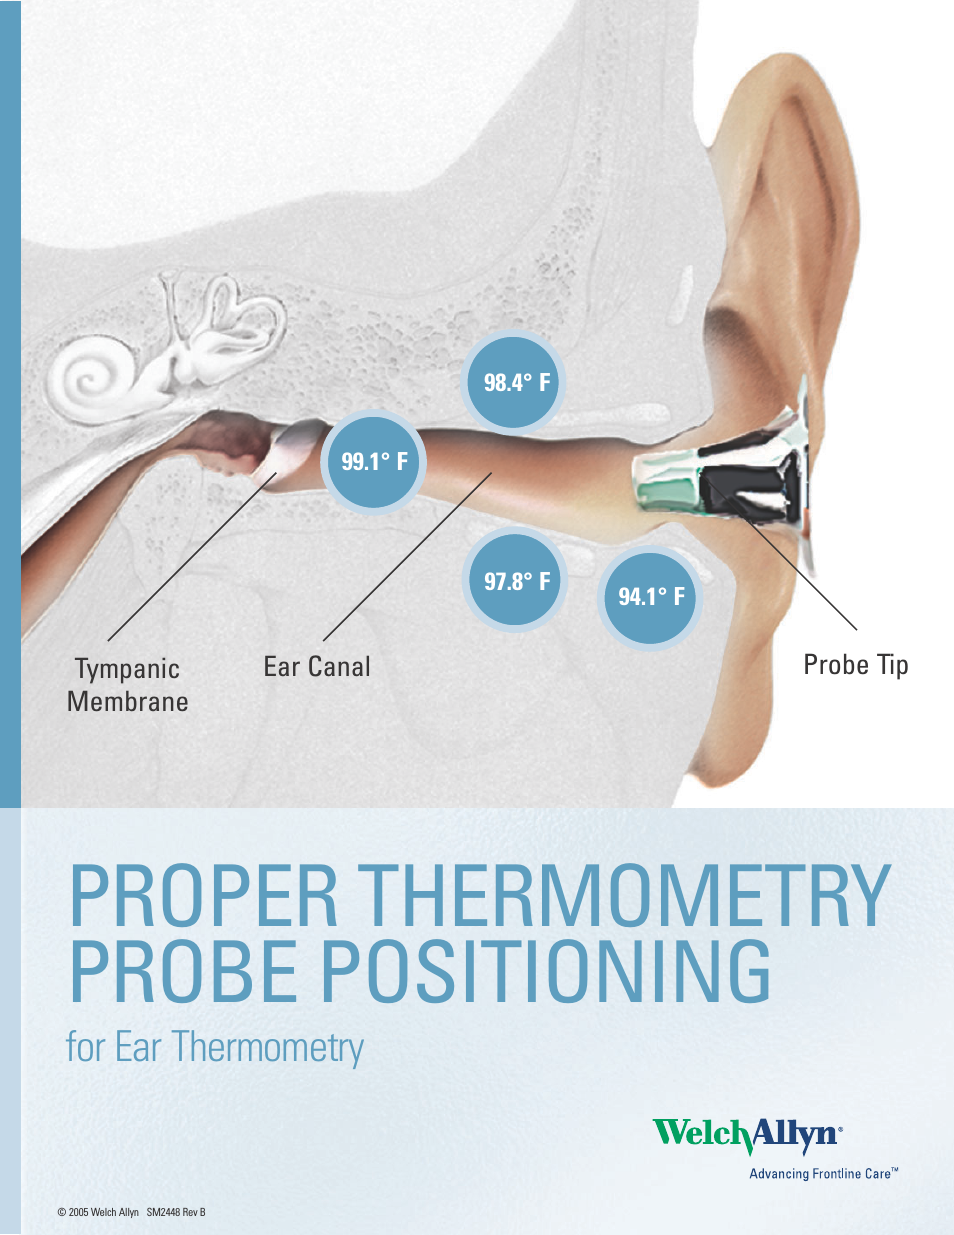 Ear Thermometry Probe Positioning Reference Card - Quick Reference Guide